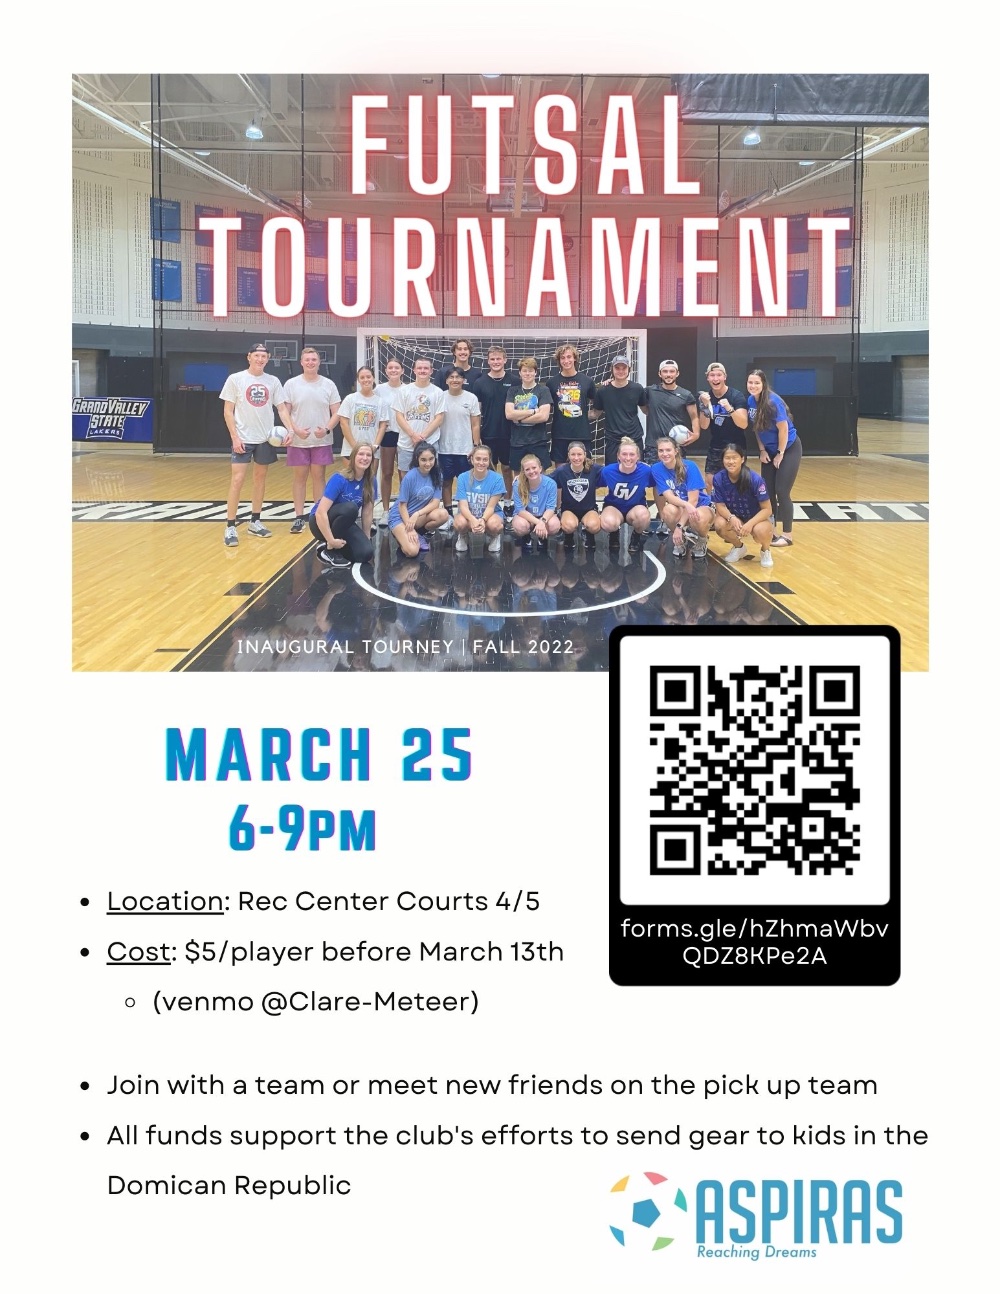 Futsal Tournament on March 25 from 6-9pm at the Rec Center